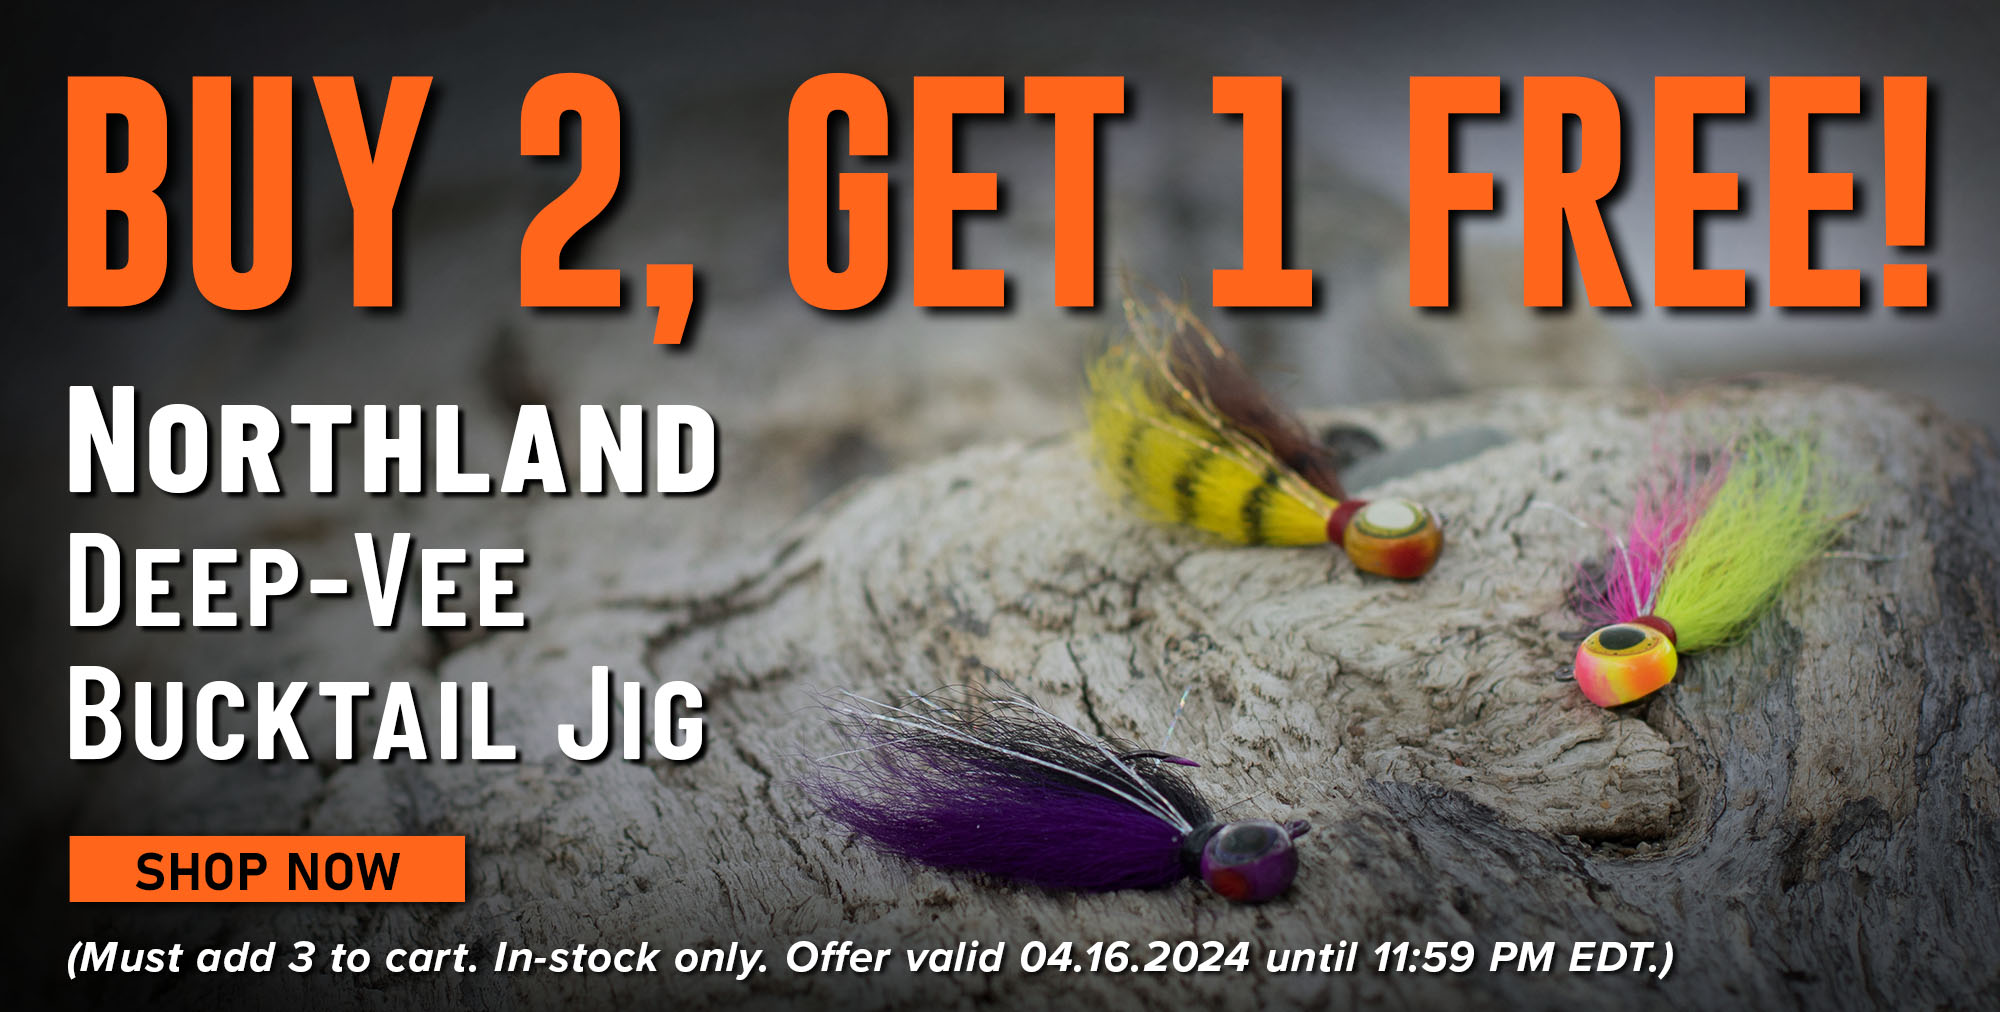 Northland Deep-Vee Bucktail Jig Buy 2, Get 1 Free Today Only